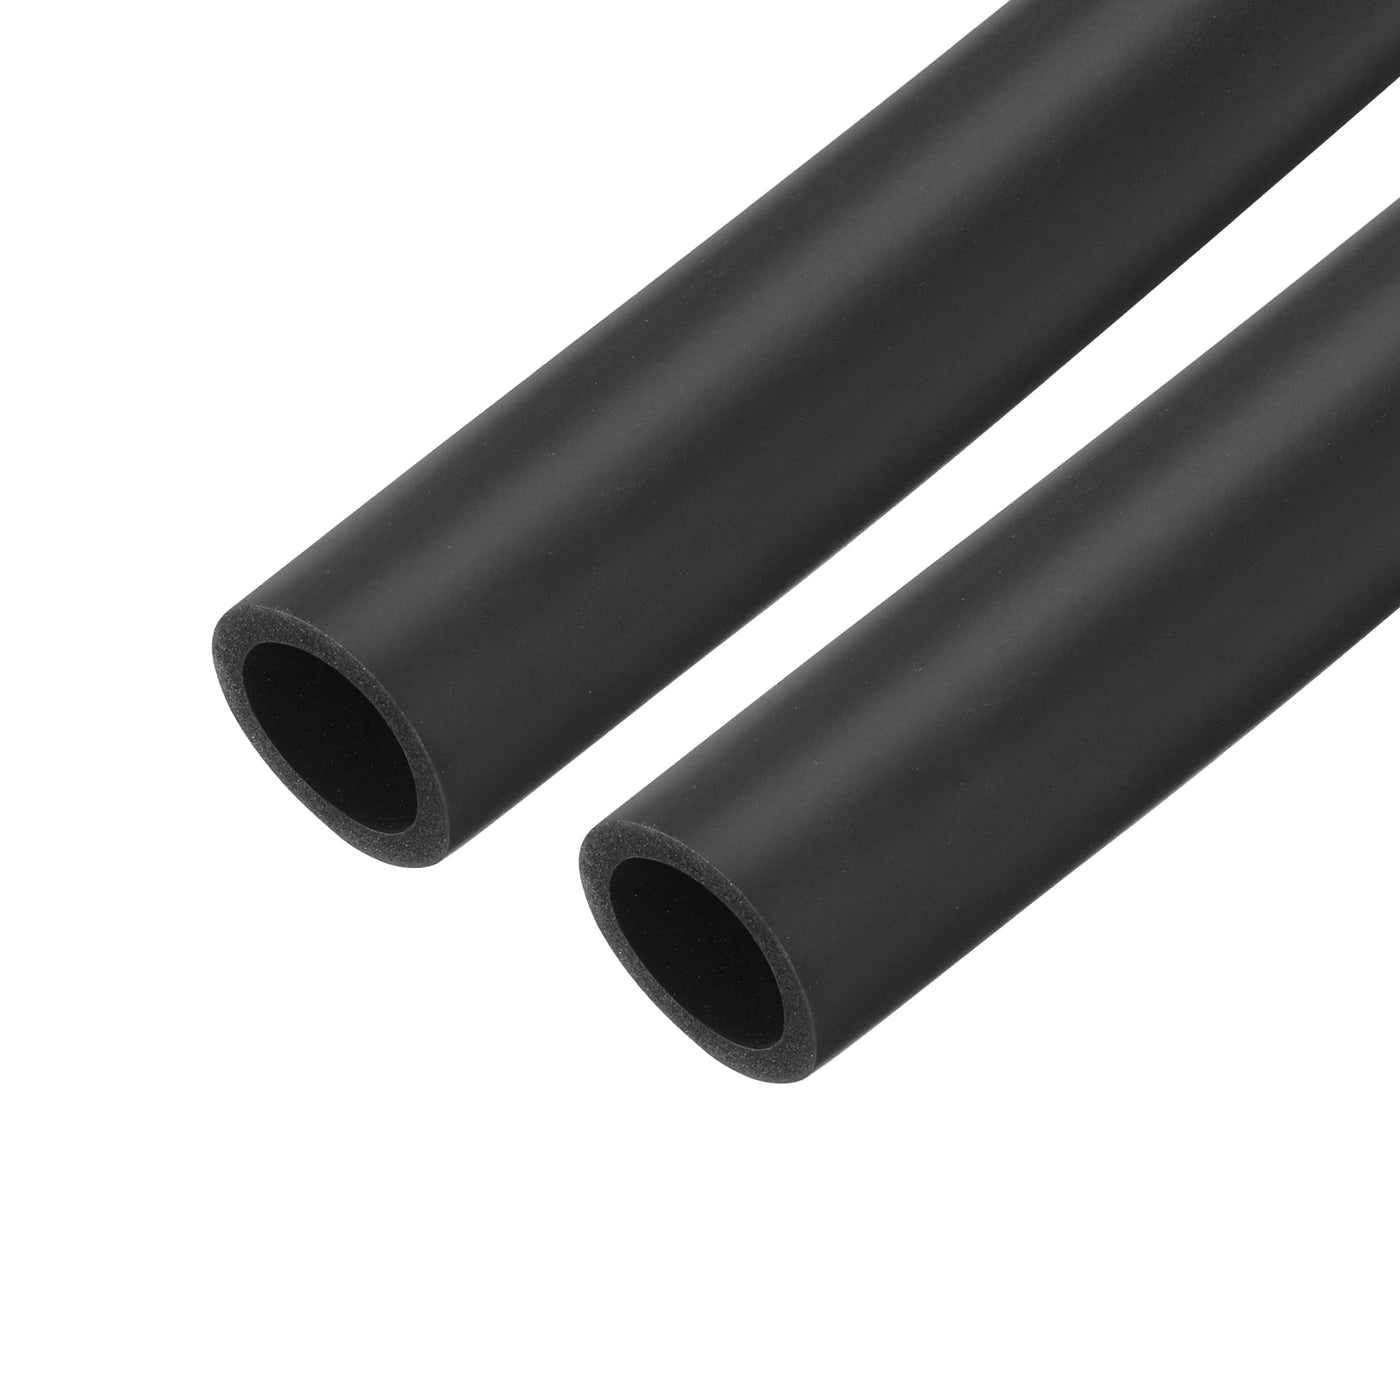 uxcell Uxcell 2pcs 3.3ft Pipe Insulation Tube 28mm ID 38mm OD Foam Tubing for Handle Grip Support, Black